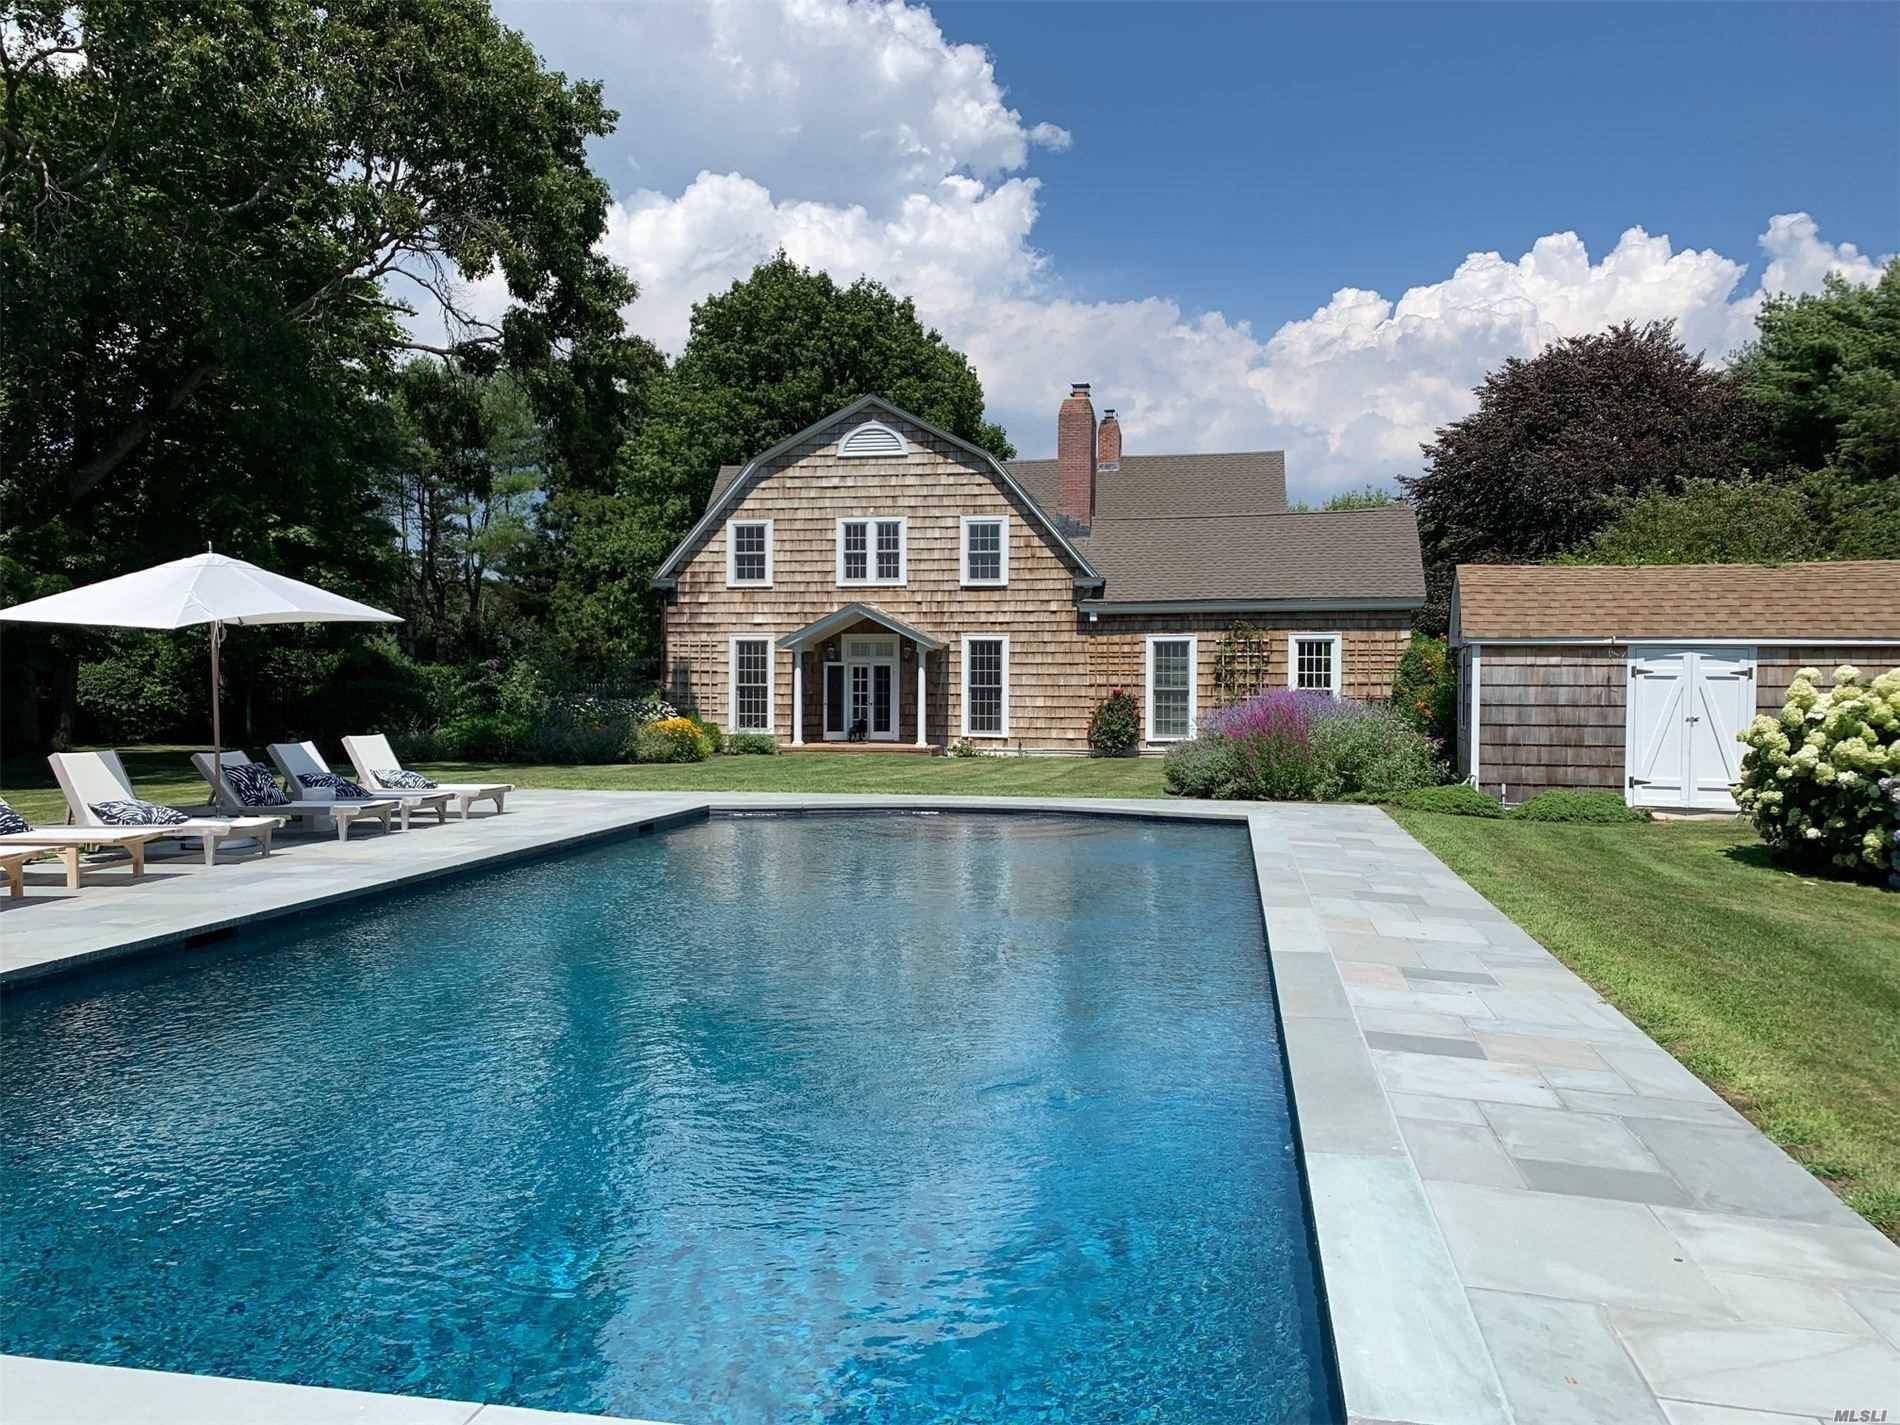 GORGEOUS QUOGUE TRADITIONAL Magnificent 4 BR 5 BA home in the Estate section of Quogue with plenty of living space.